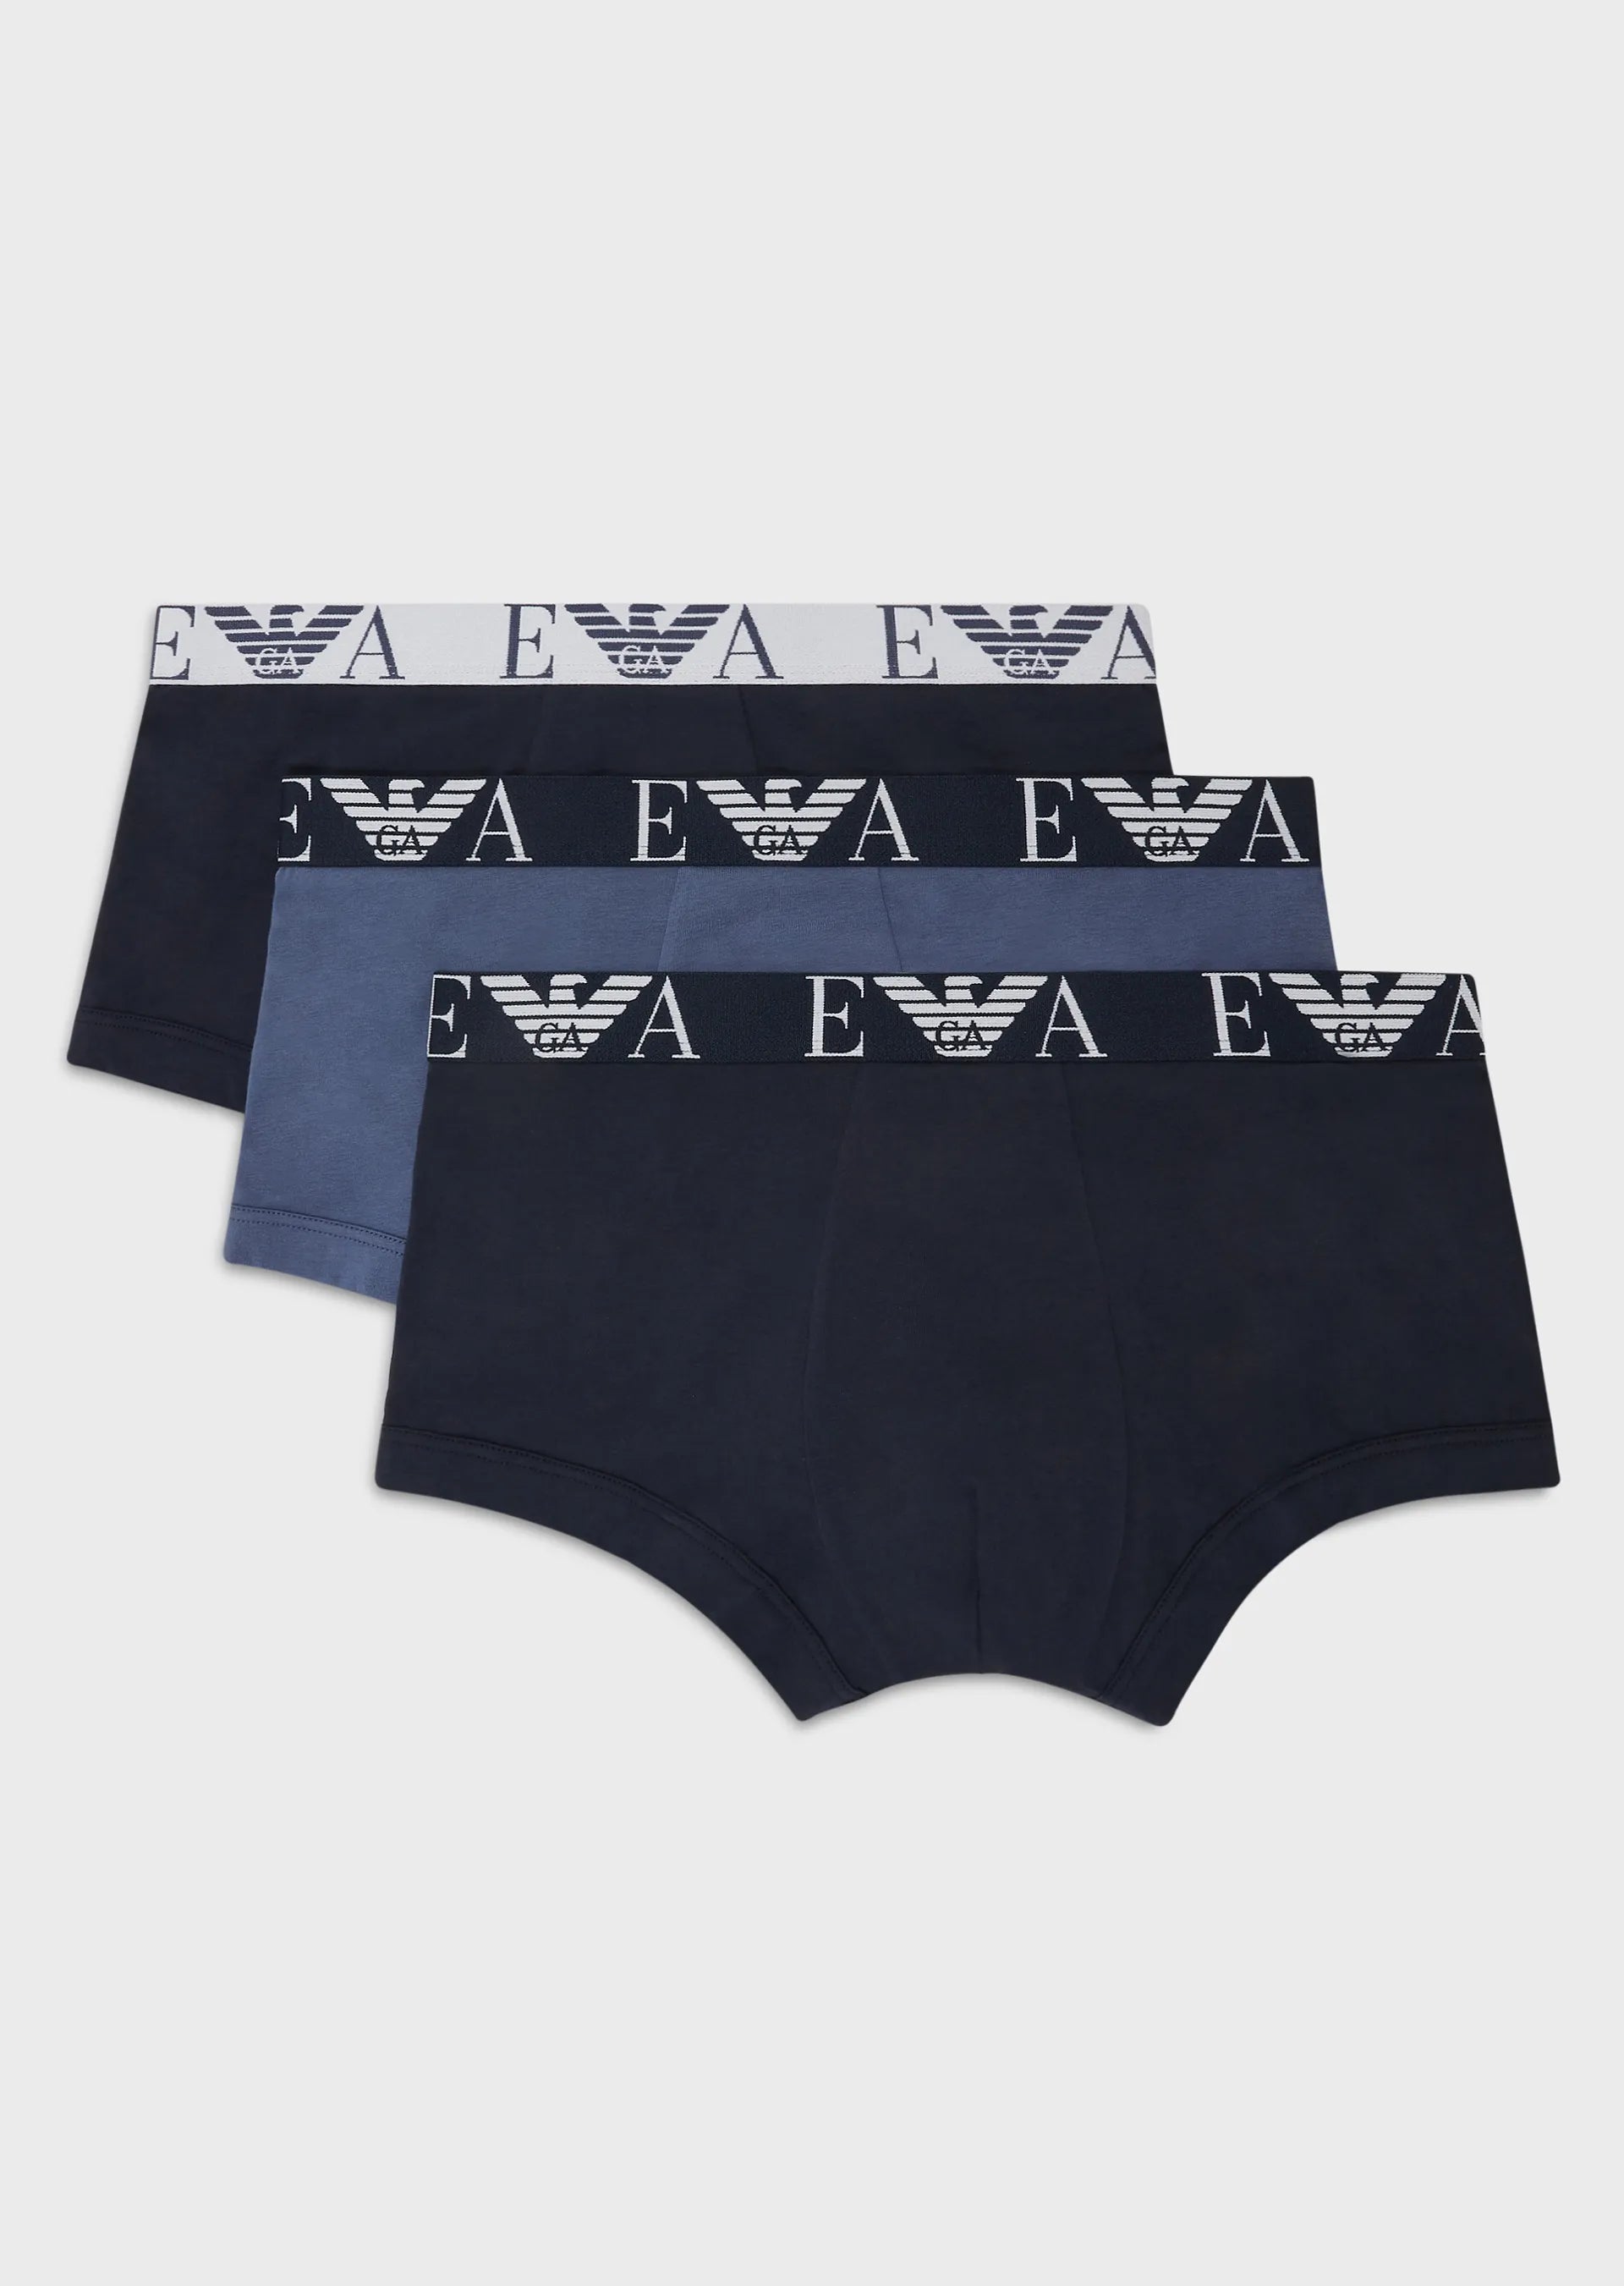 Emporio Armani Men's 3-Pack Cotton Trunk, Black, Small : :  Clothing, Shoes & Accessories